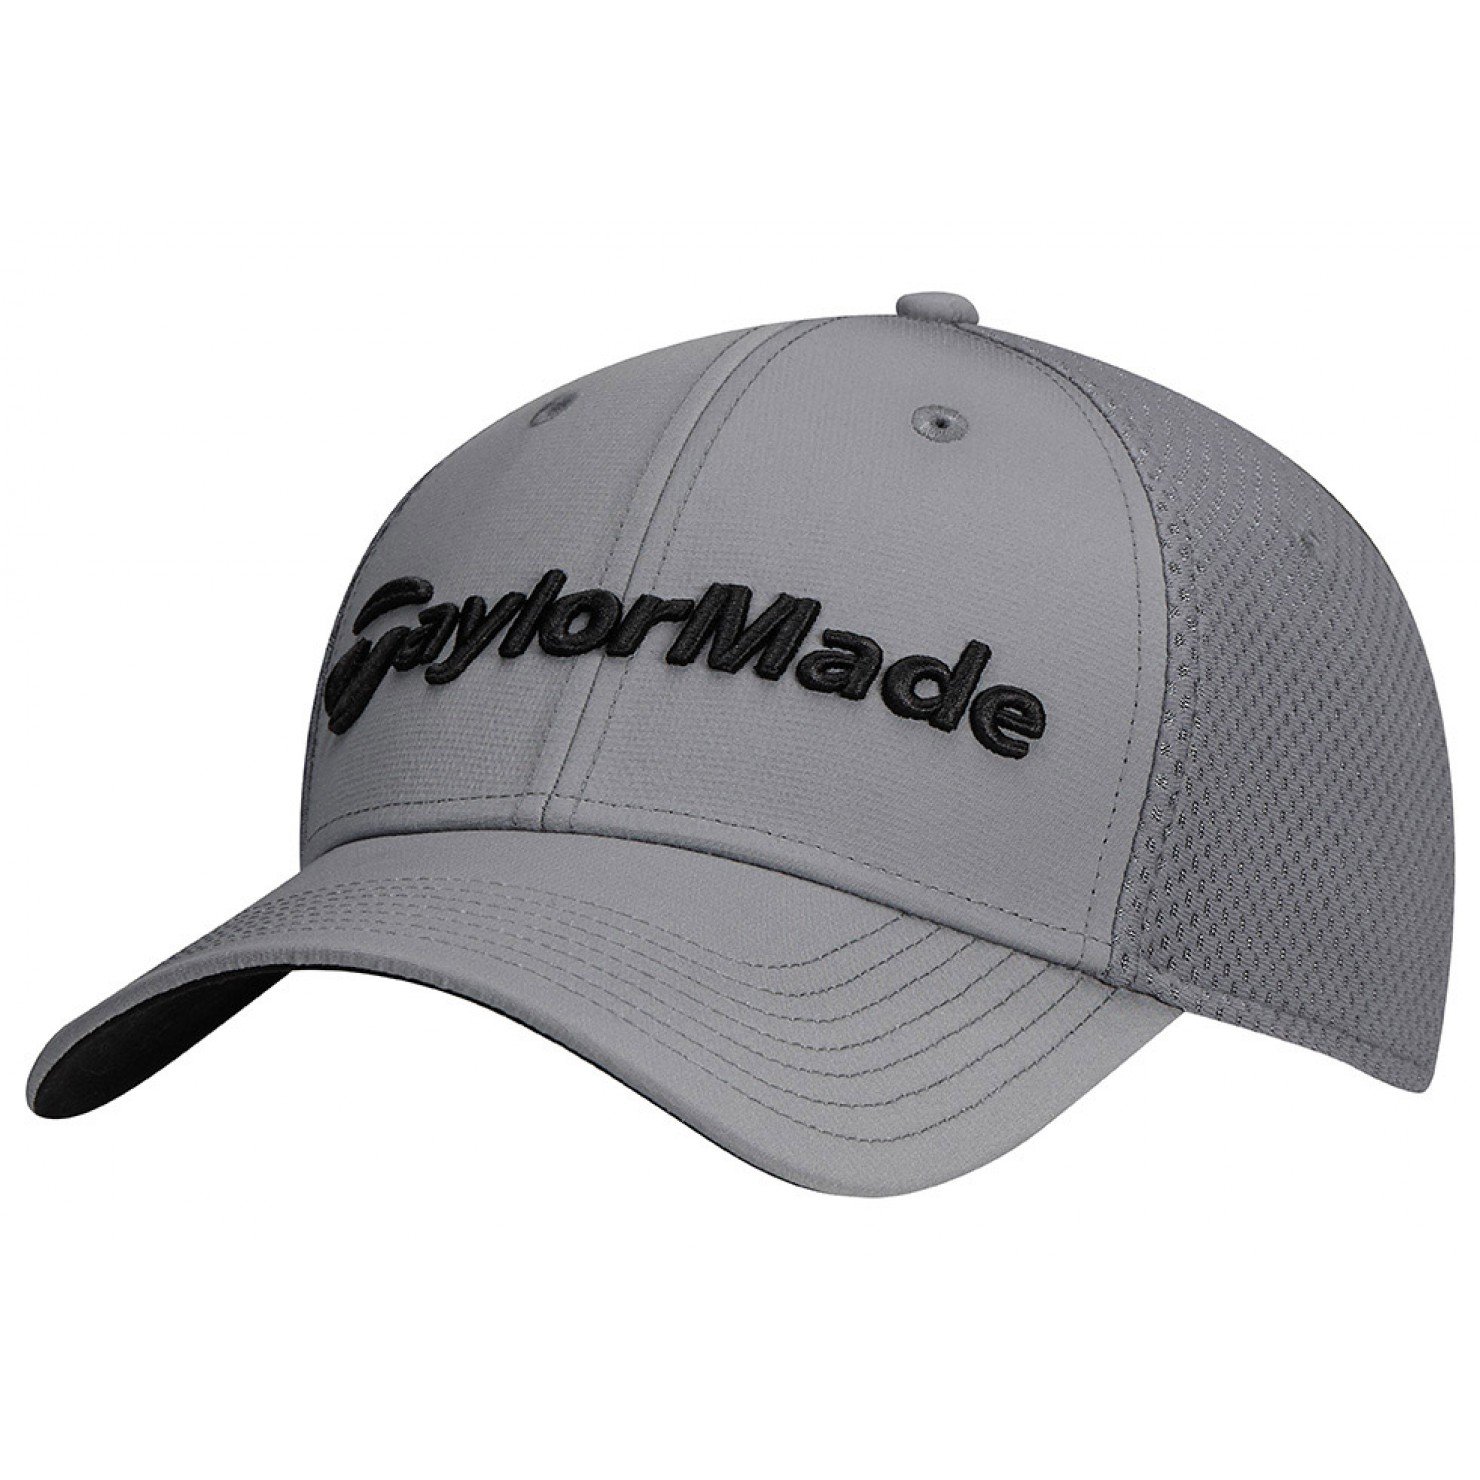 New TaylorMade Golf Performance Cage Fitted Hat Cap - Pick Size & Color ...